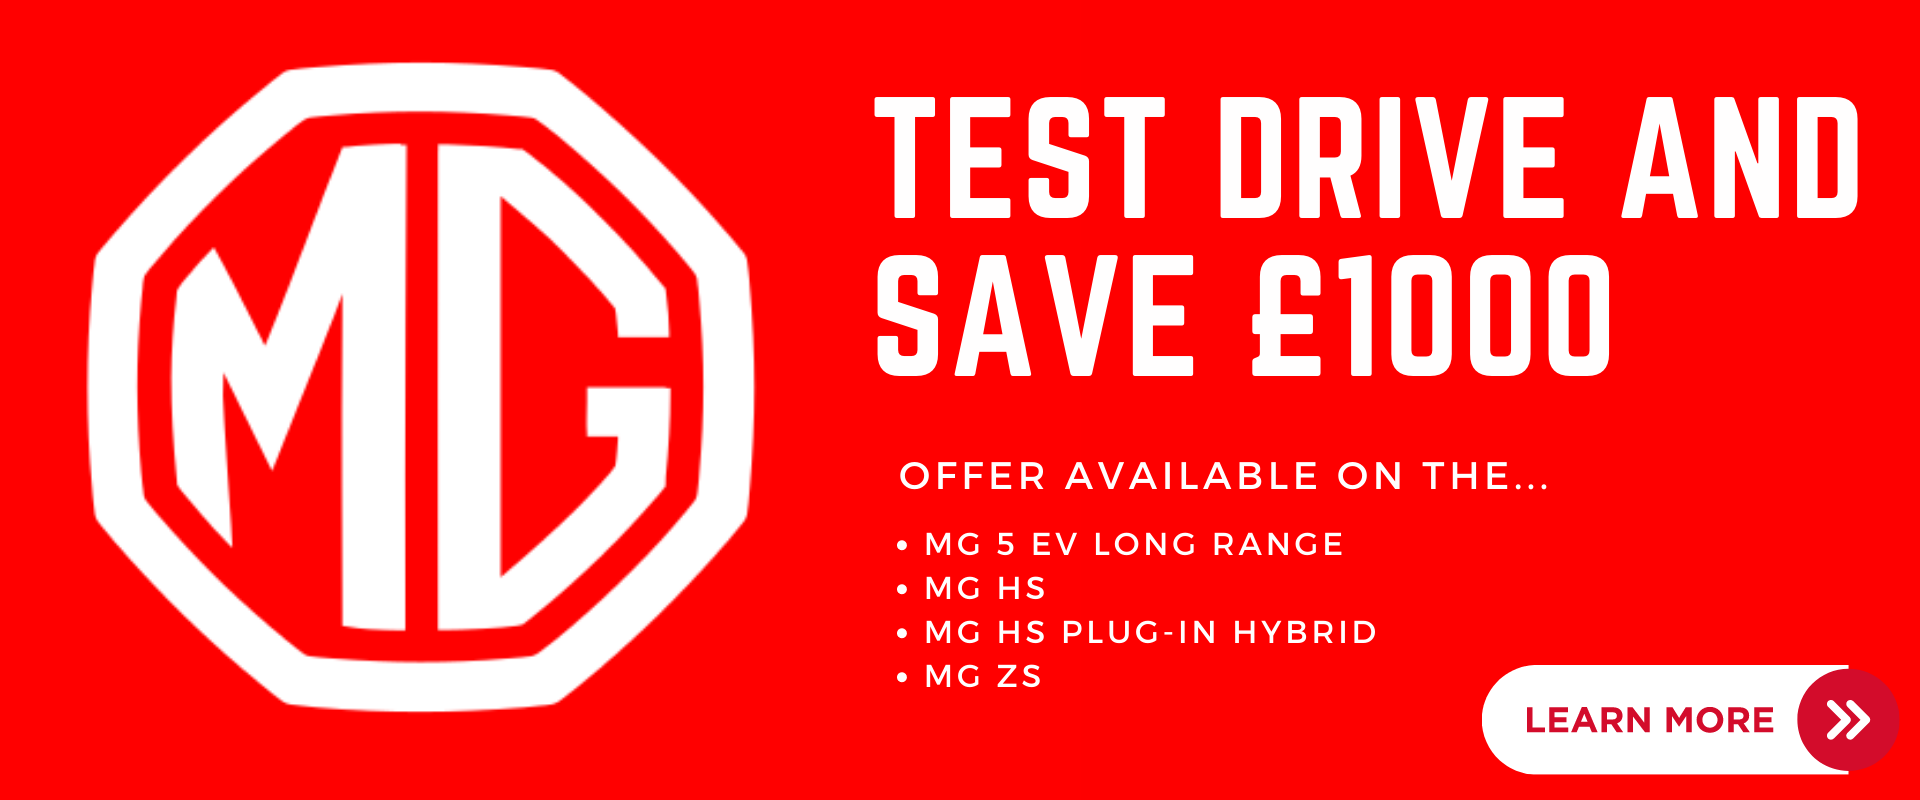 MG Test Drive Offer